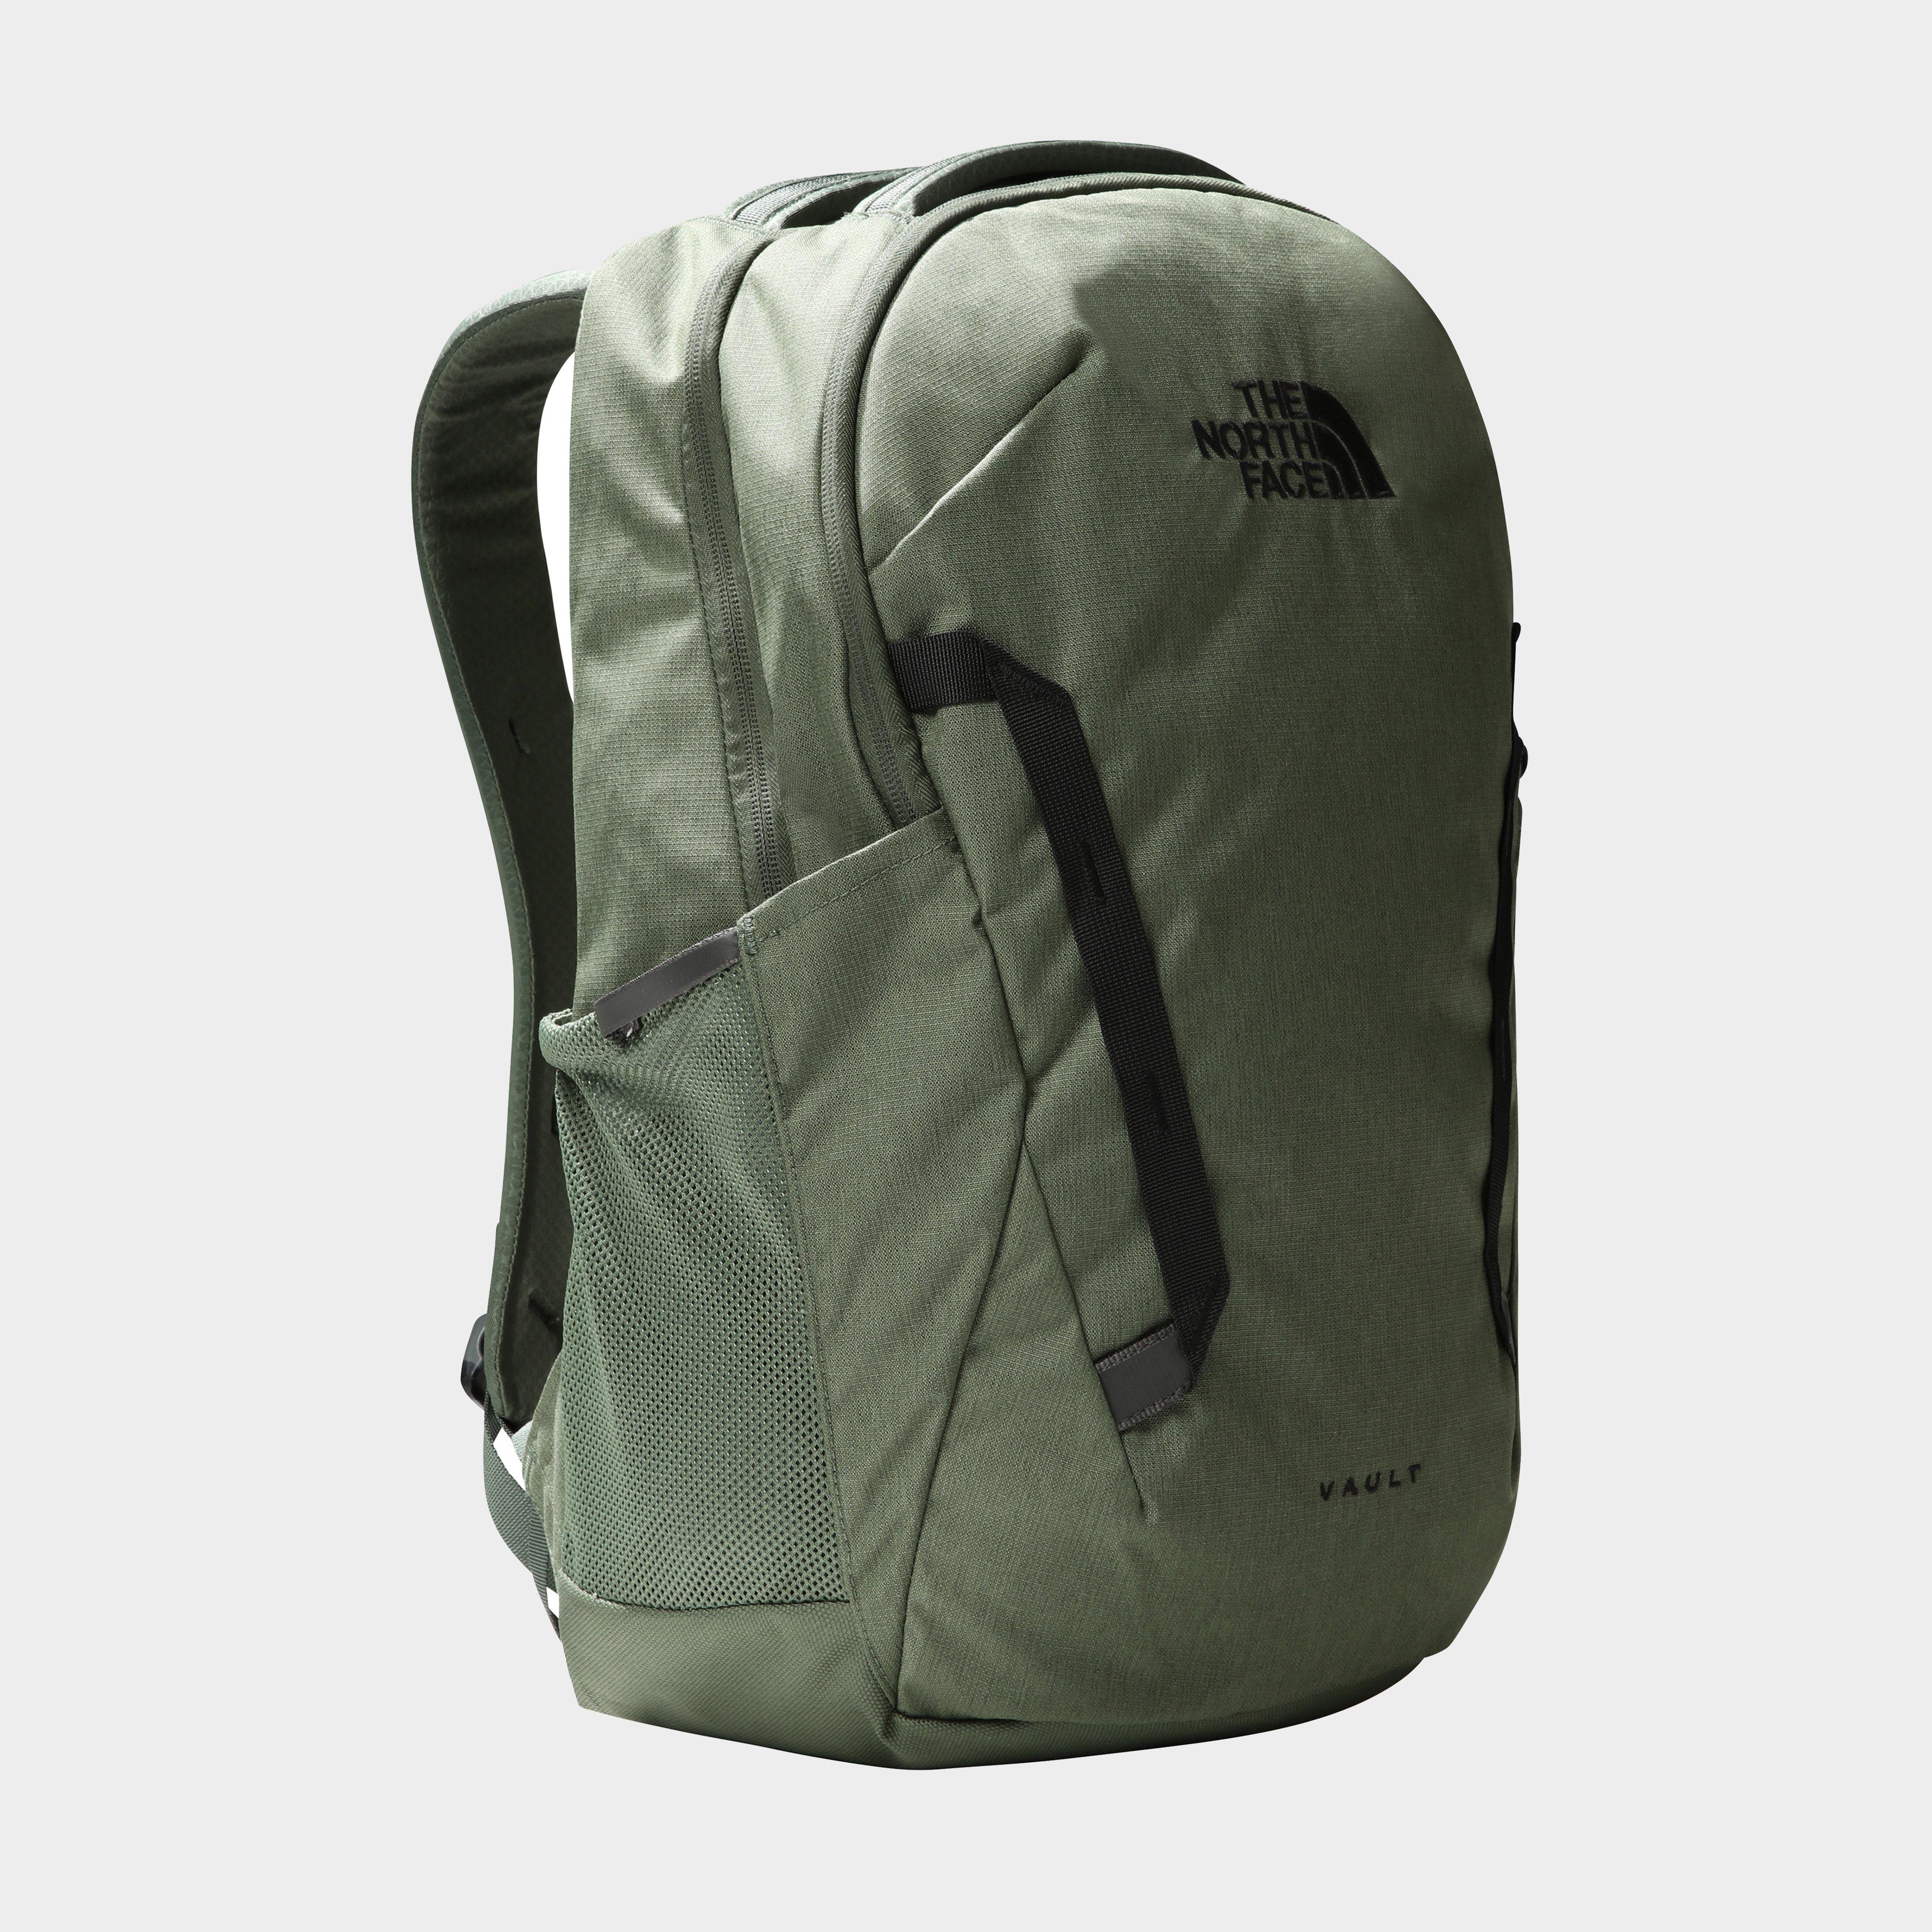 The North Face Vault 26l Backpack - Green/green  Green/green